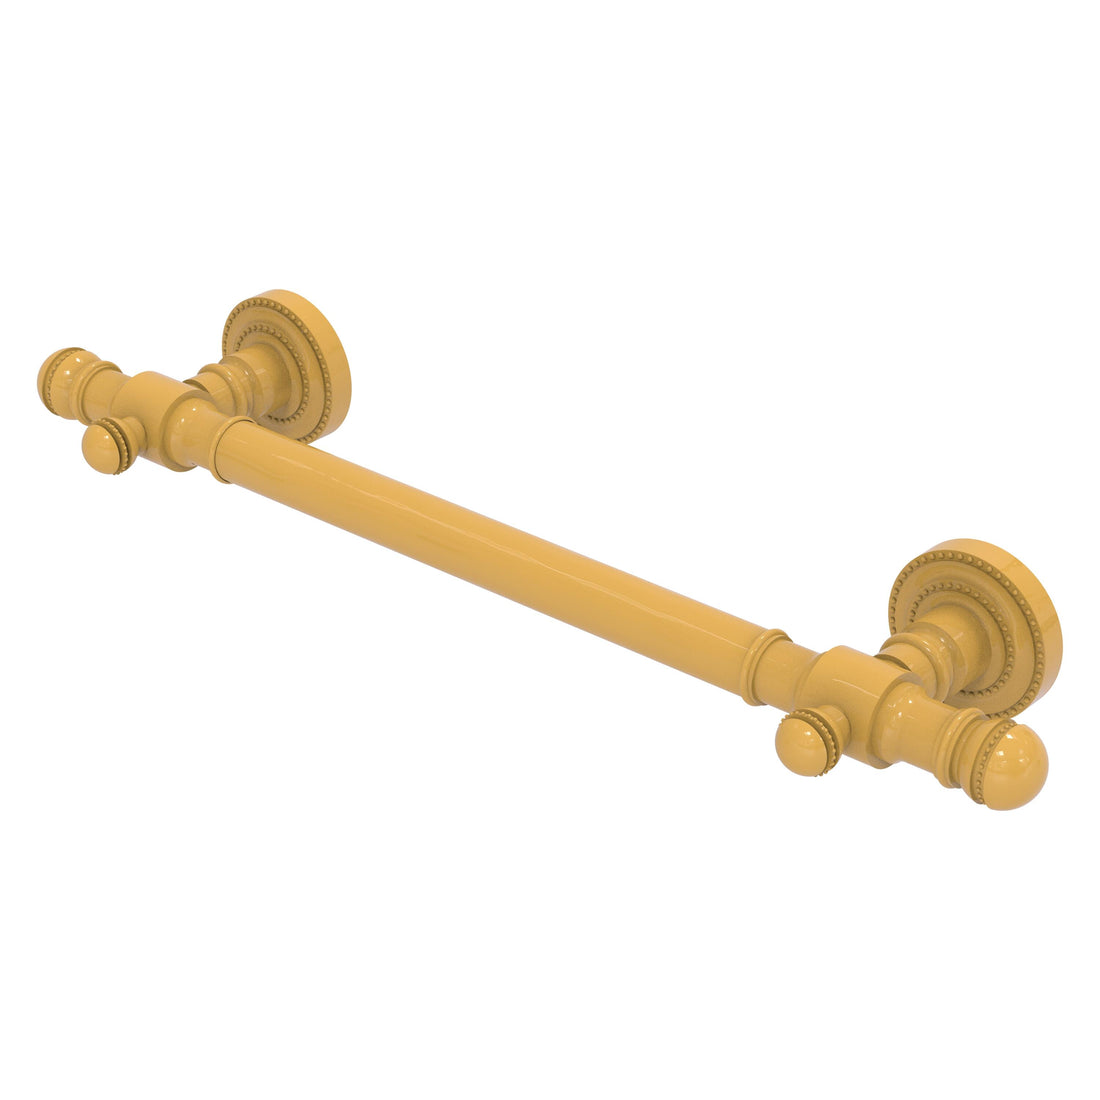 Brass grab bar with smooth surface